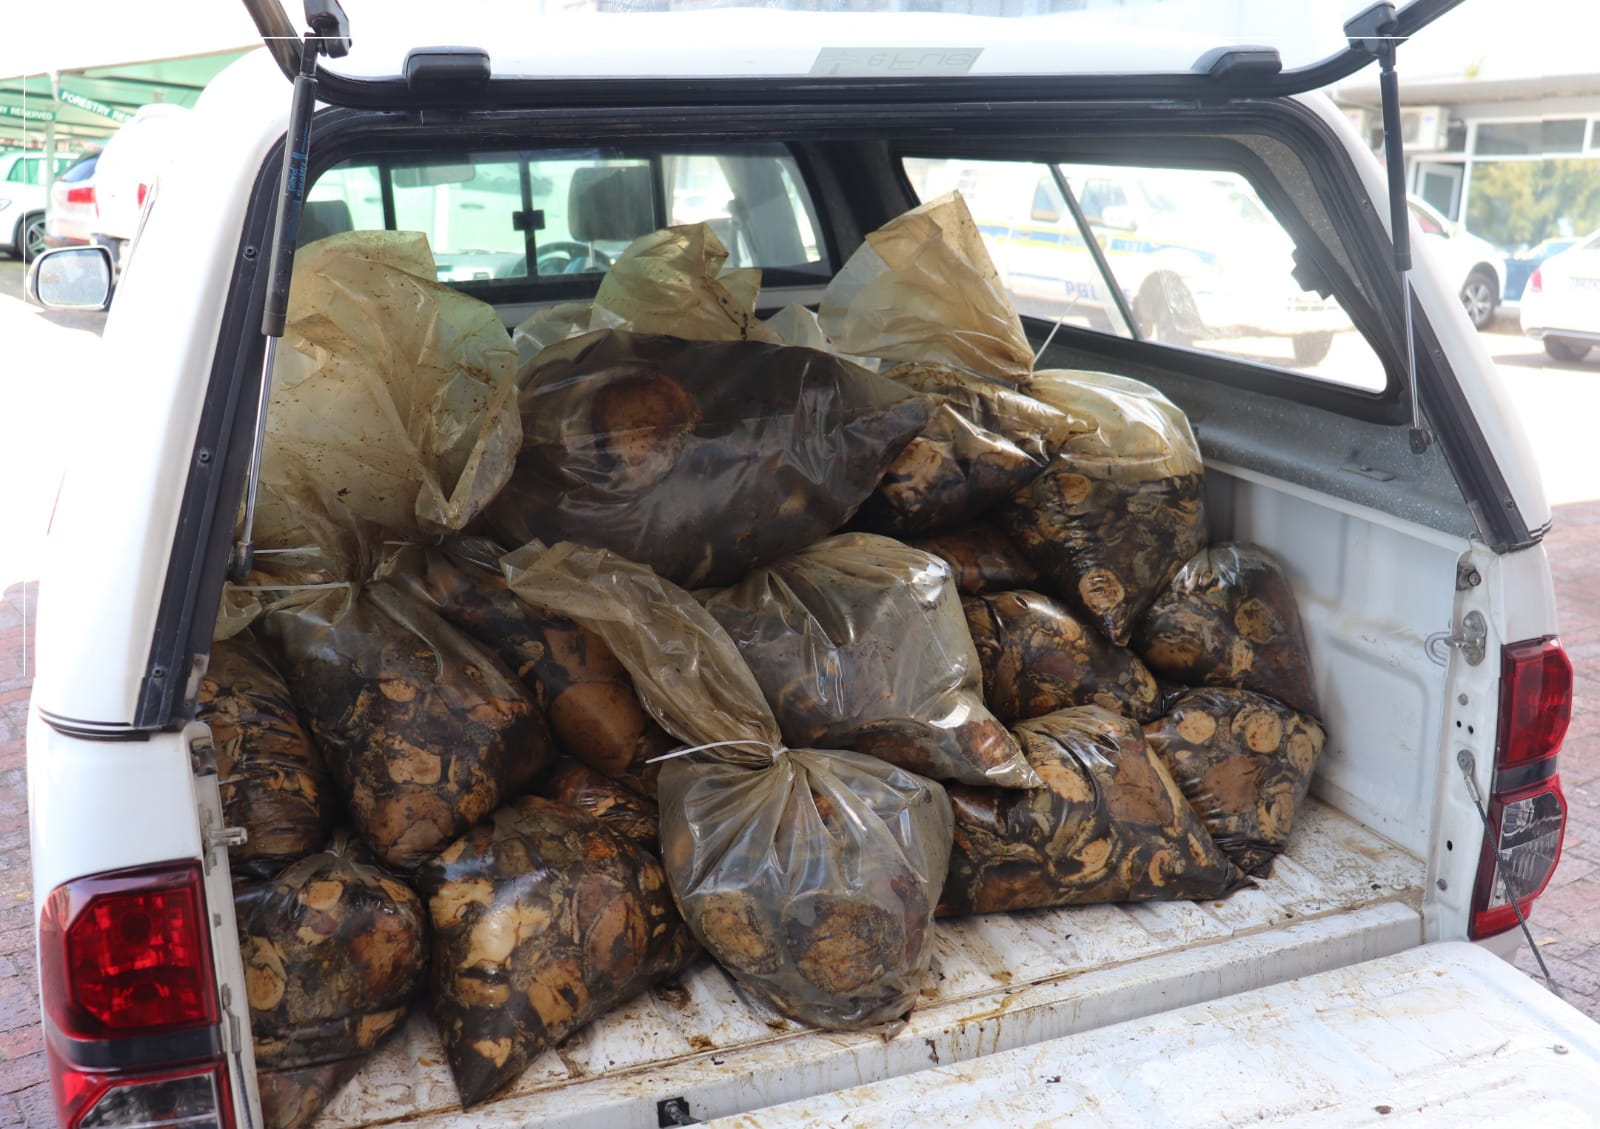 Illicit and lucrative abalone trade dealt a heavy blow with the confiscation of R700 000 worth of abalone near Plettenberg Bay